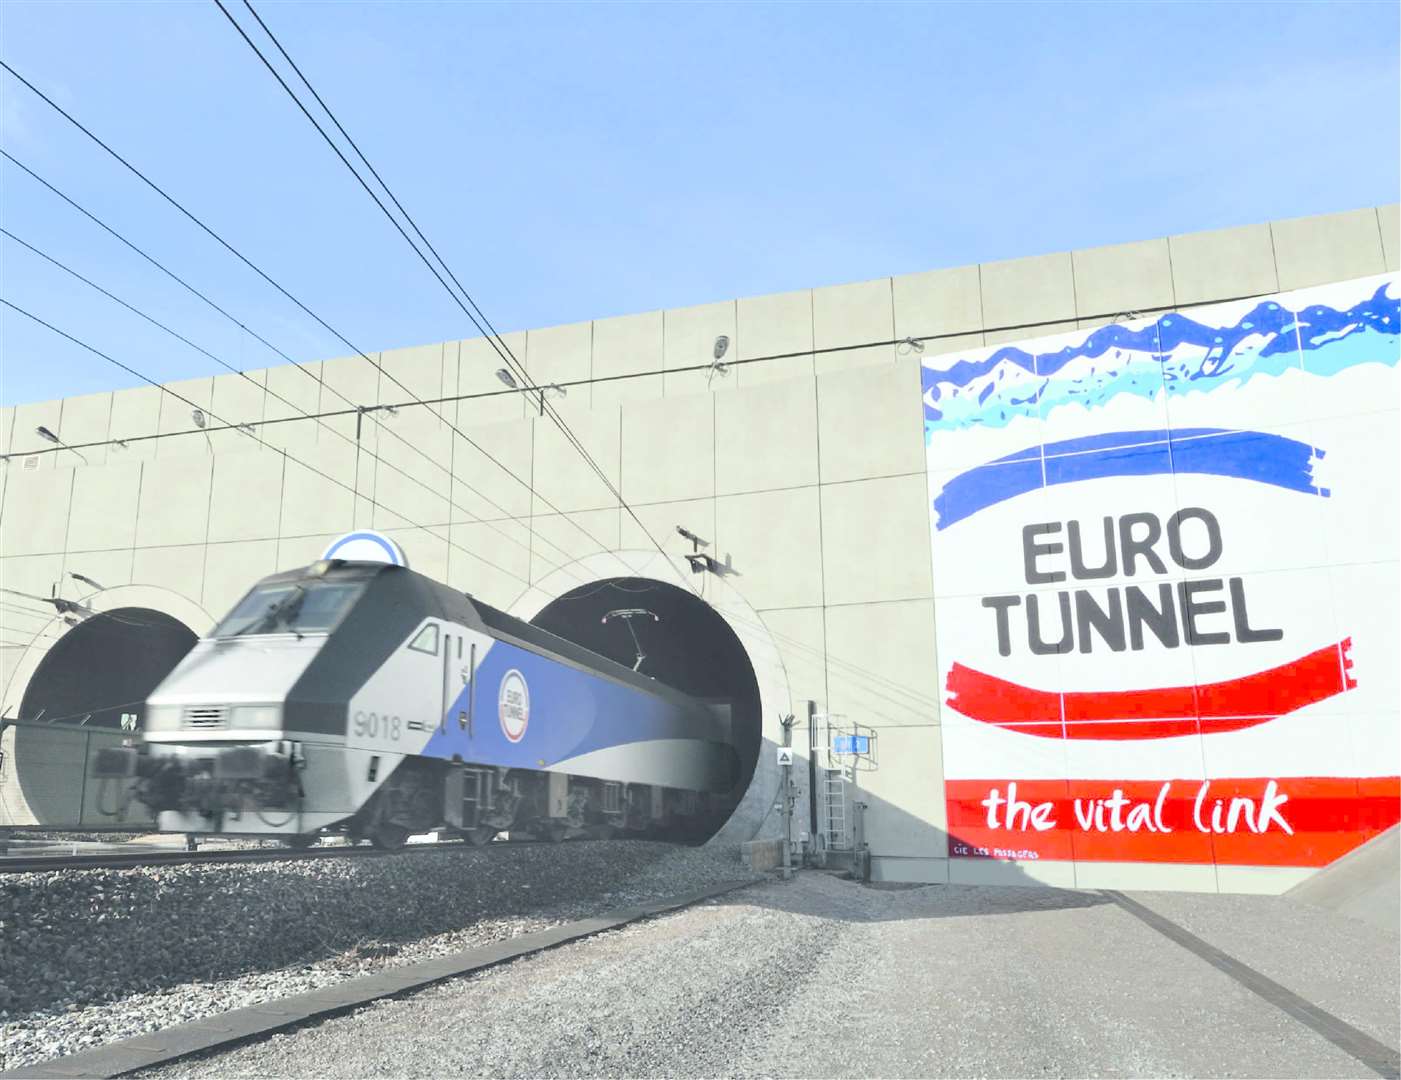 Eurotunnel has seen record revenues during 2018